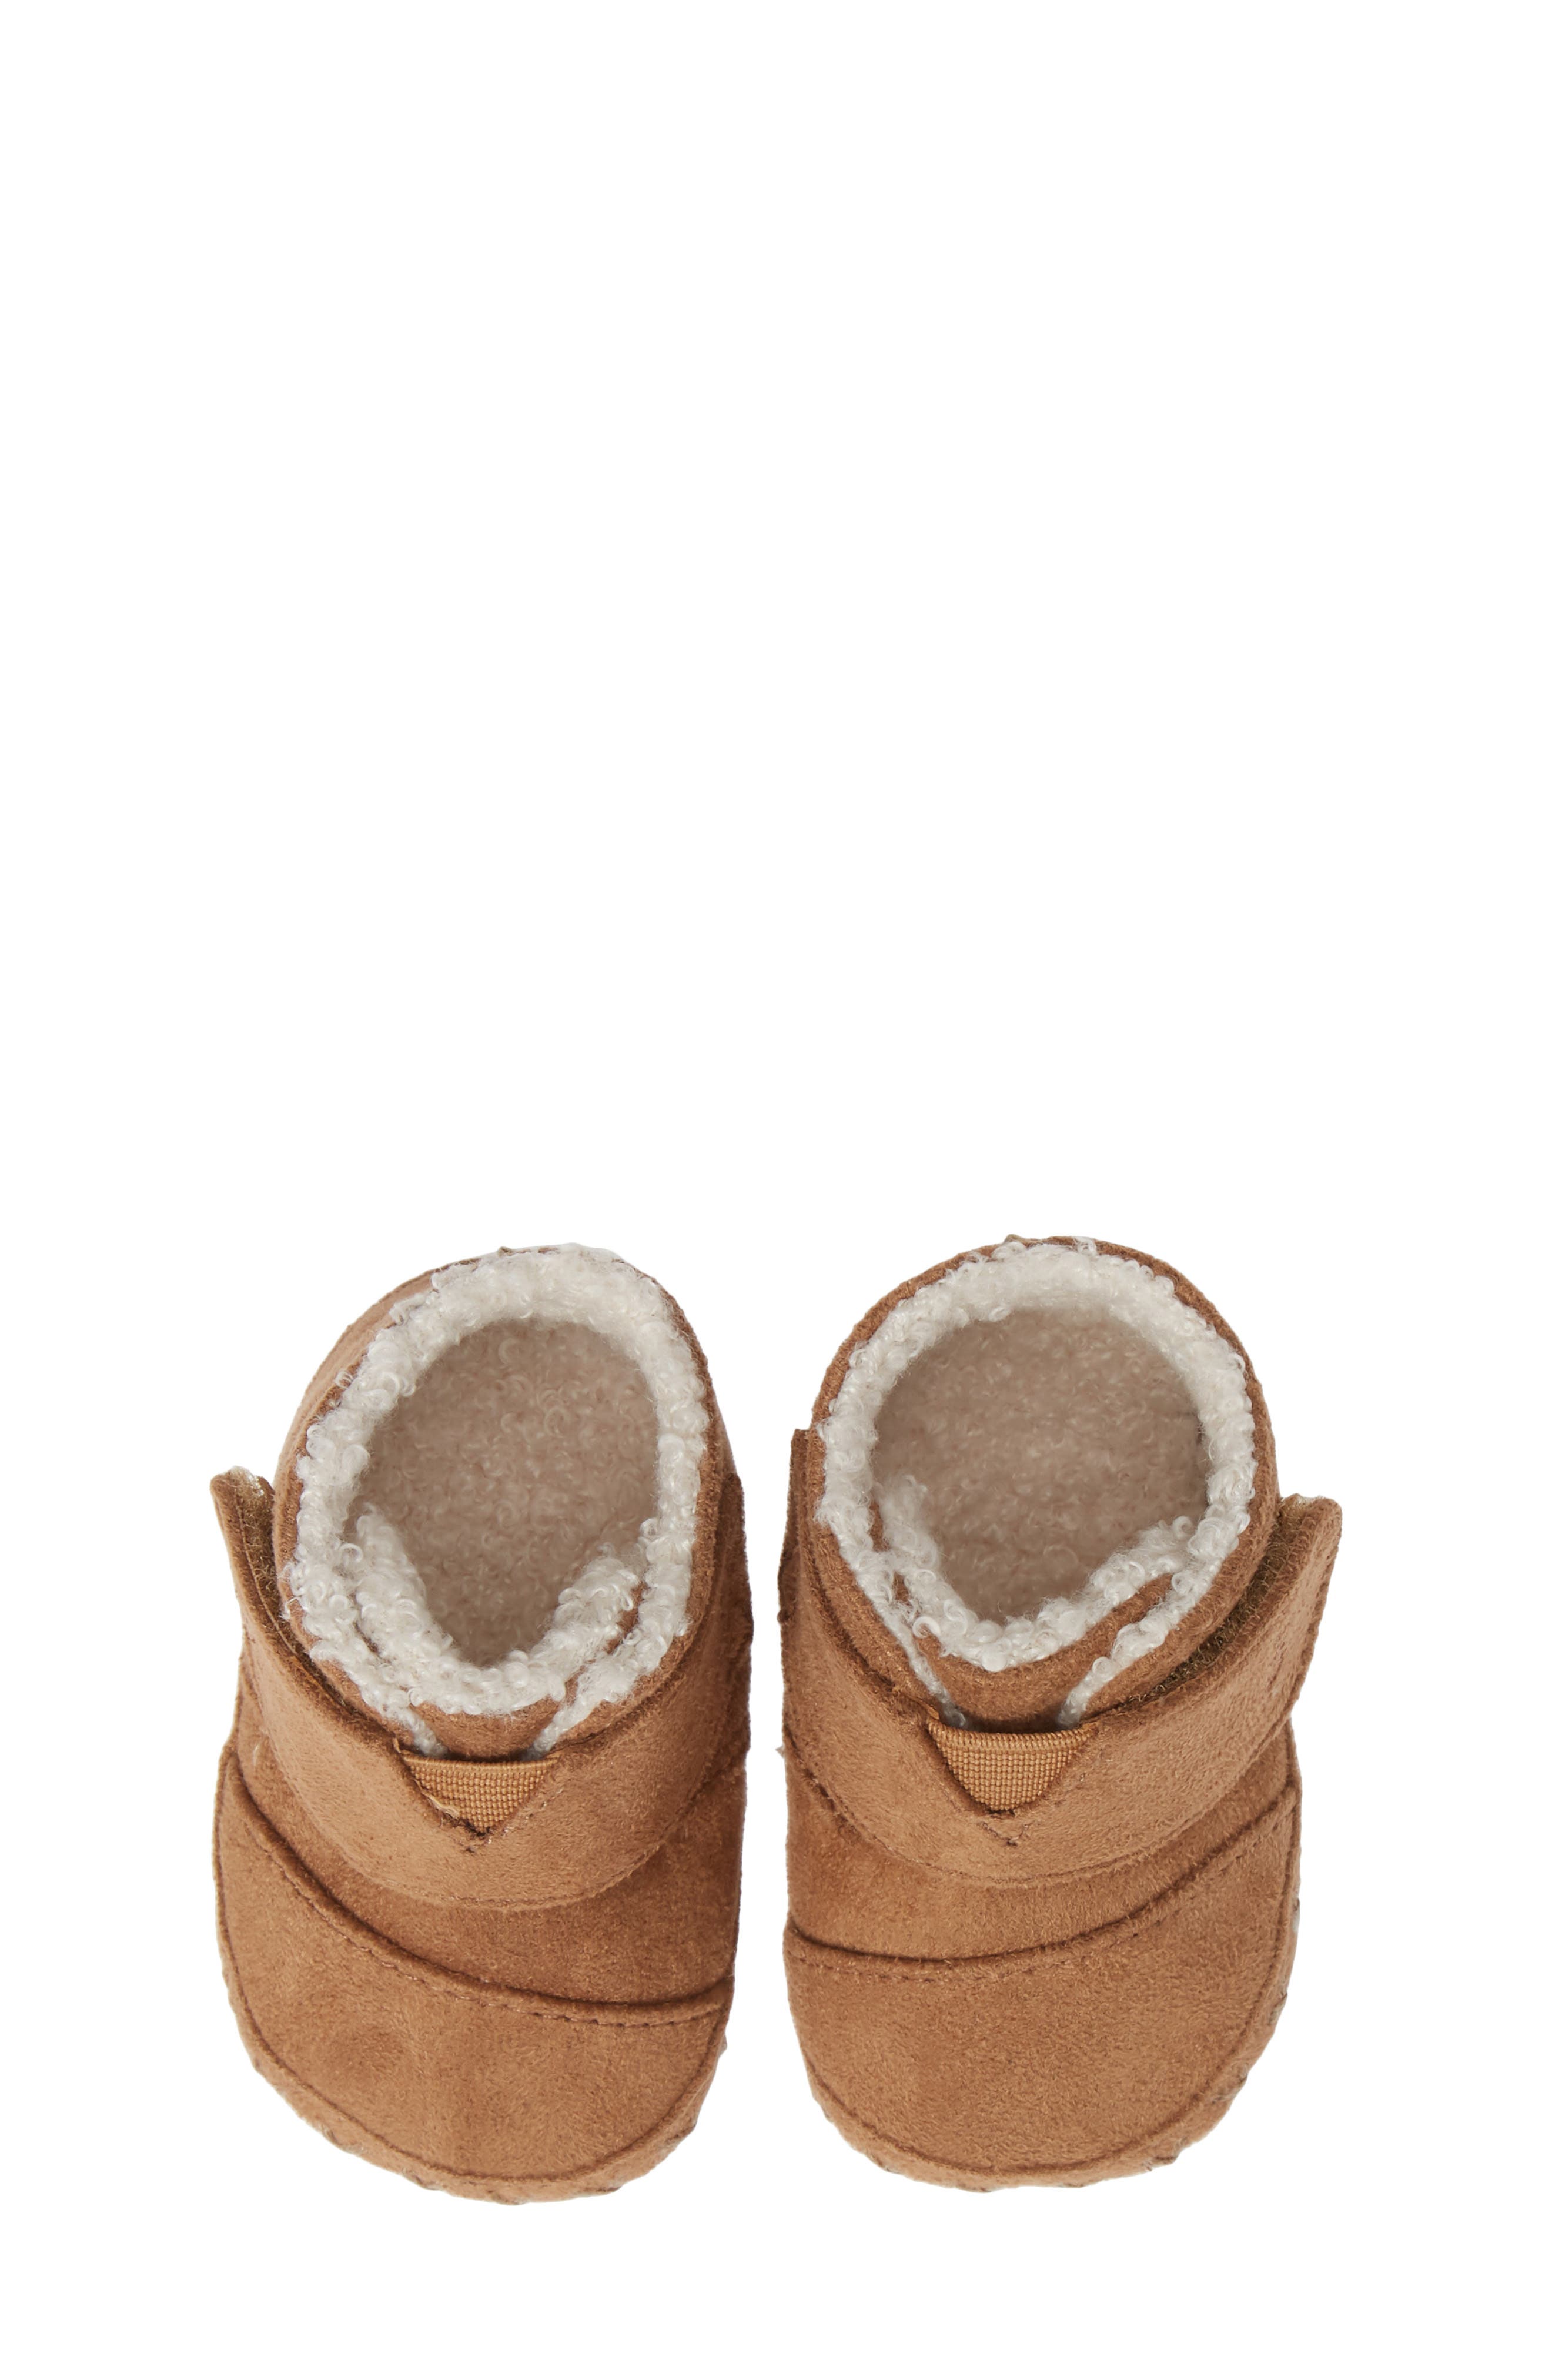 toms baby boots